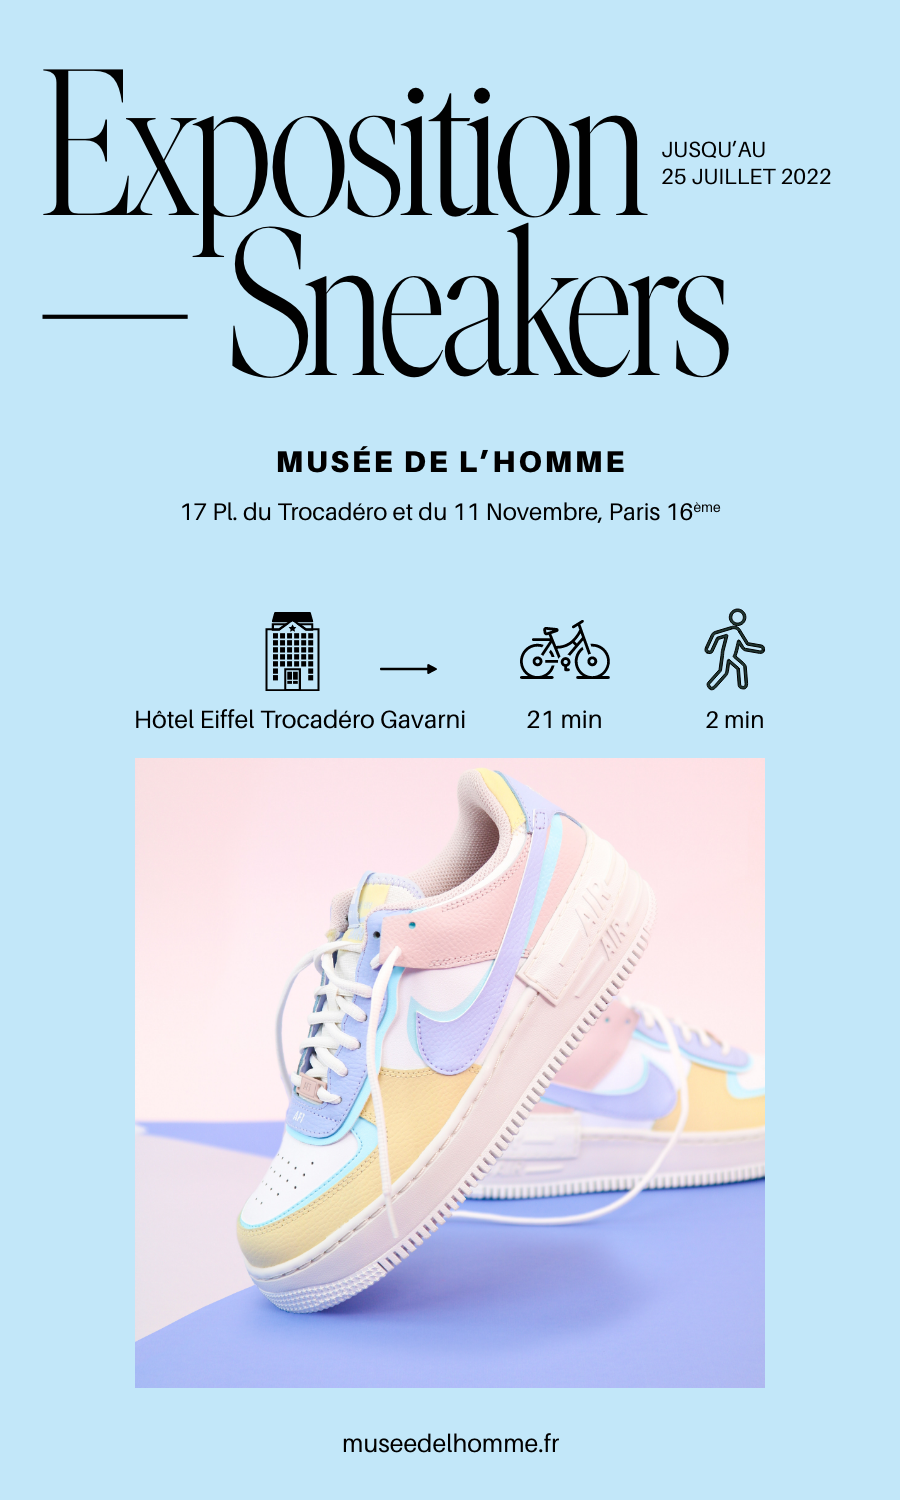 Sneakers, they enter the museum